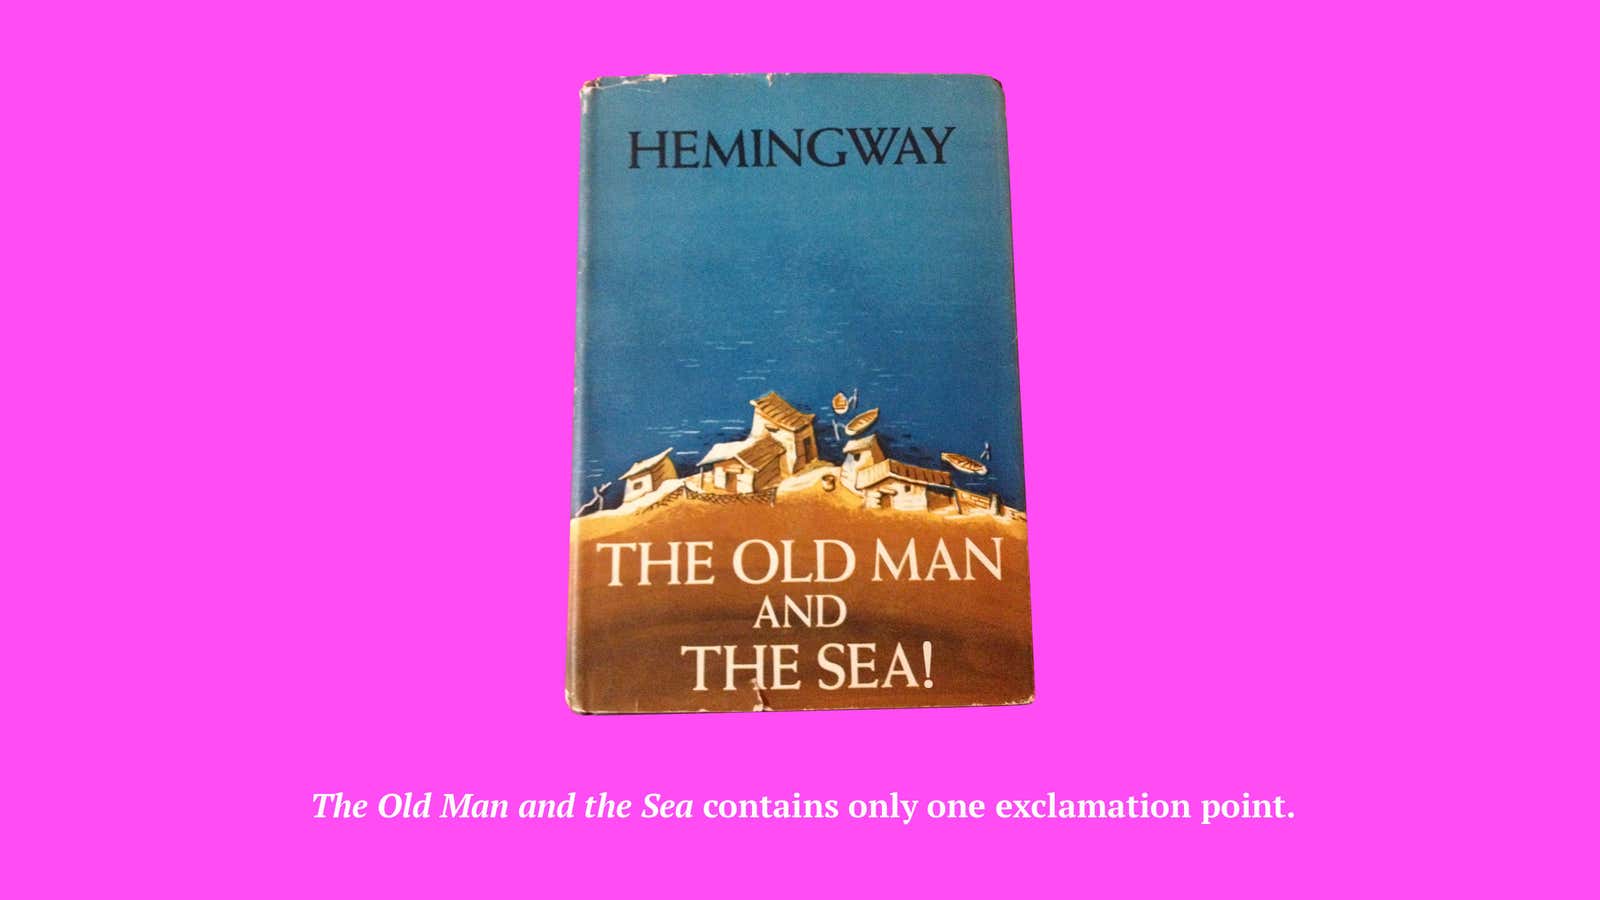 “‘Now!’ he said aloud and struck hard with both hands, gained a yard of line and then struck again and again, swinging with each arm alternately on the cord with all the strength of his arms and the pivoted weight of his body.” Ernest Hemingway, Old Man And The Sea